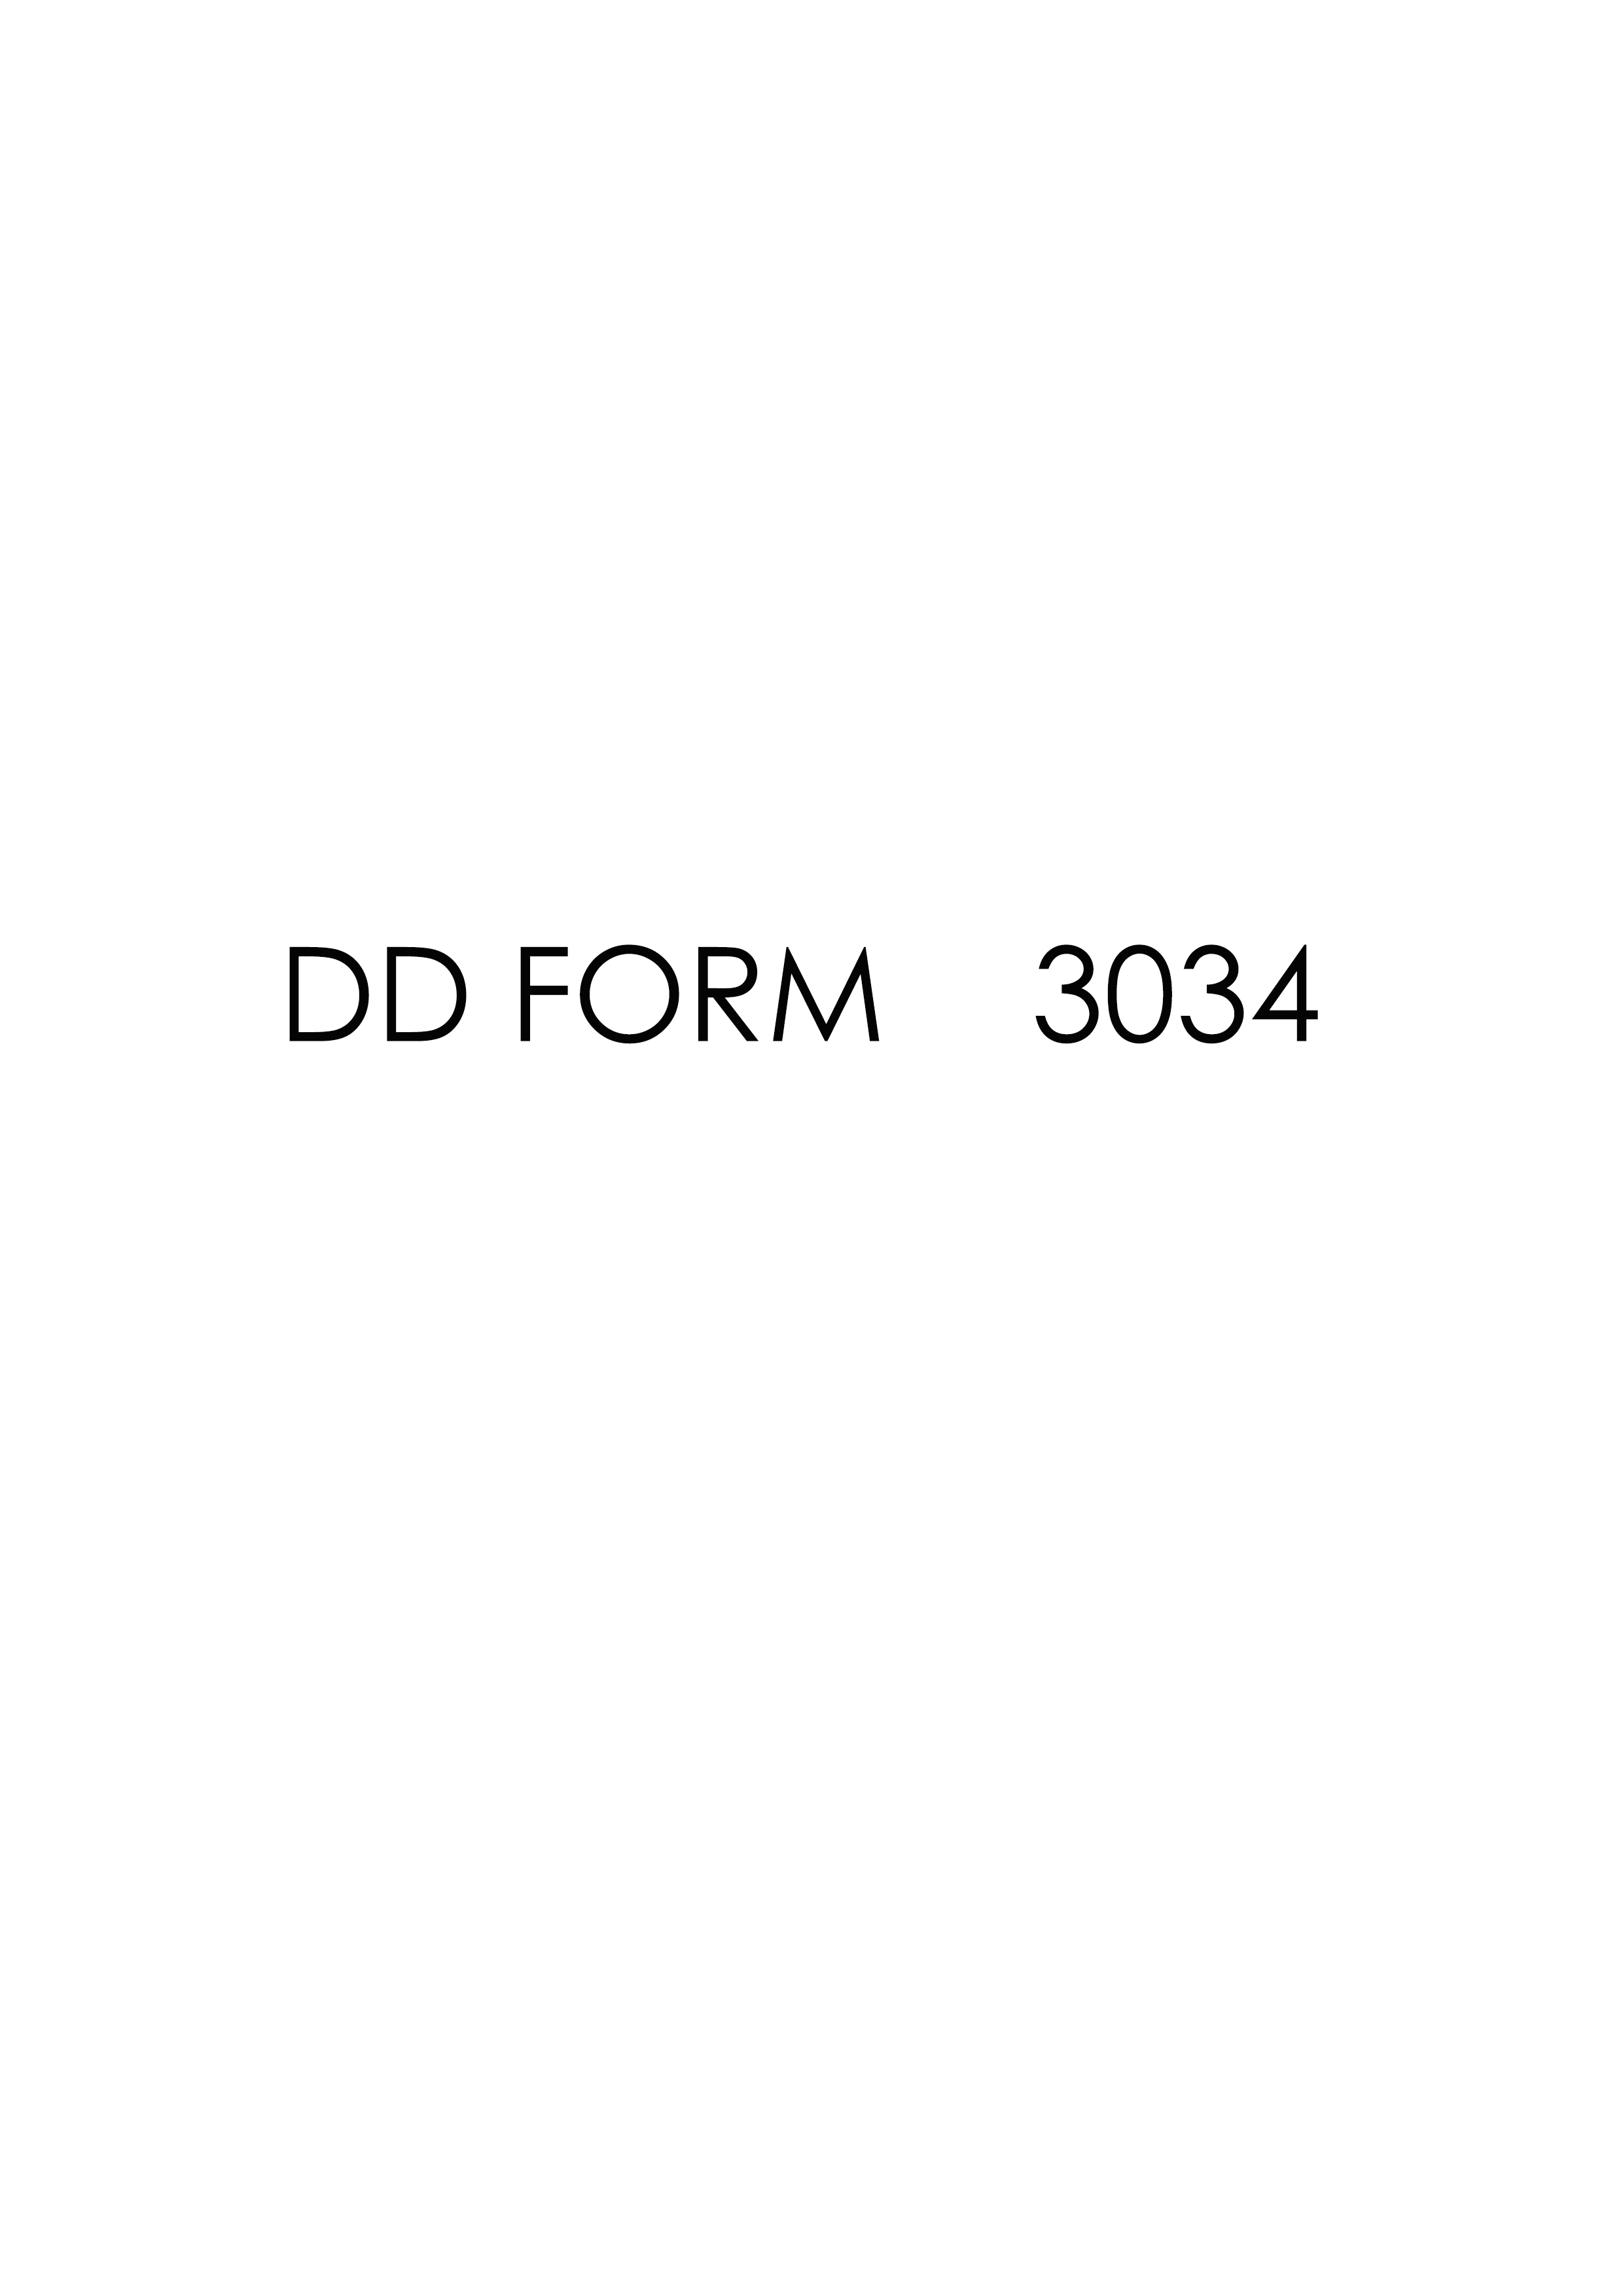 Download Fillable dd Form 3034